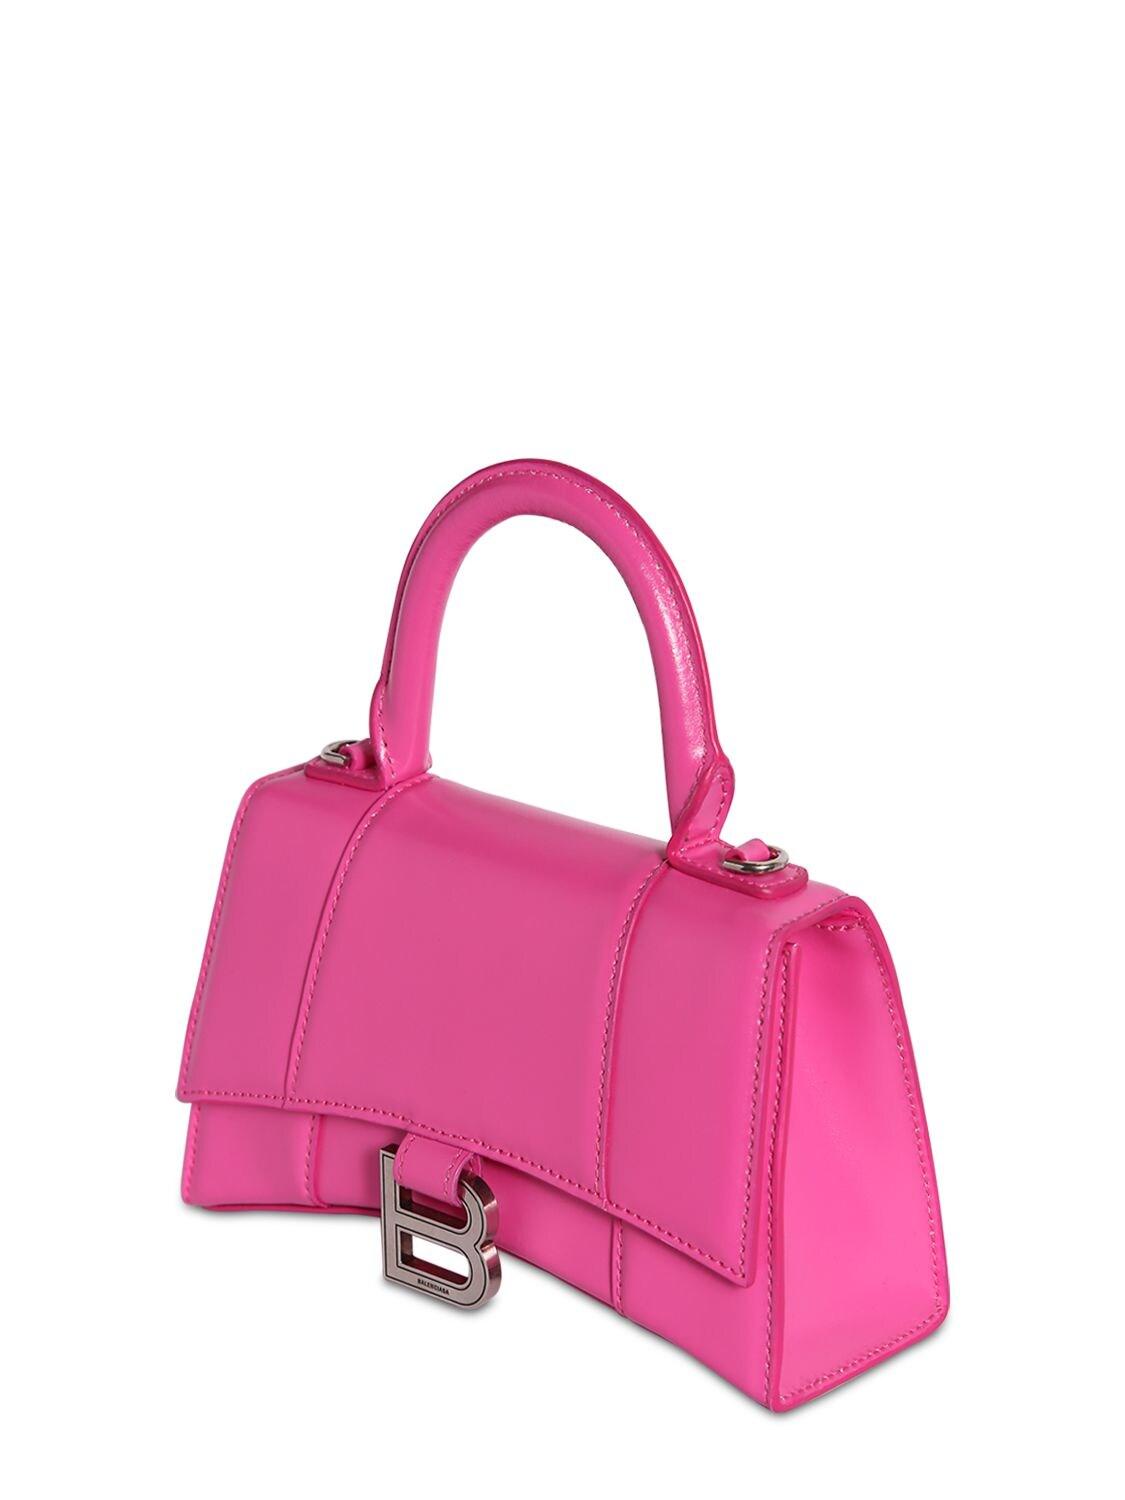 Balenciaga Xs Hourglass Smooth Leather Bag in Acid Fuchsia (Pink) | Lyst